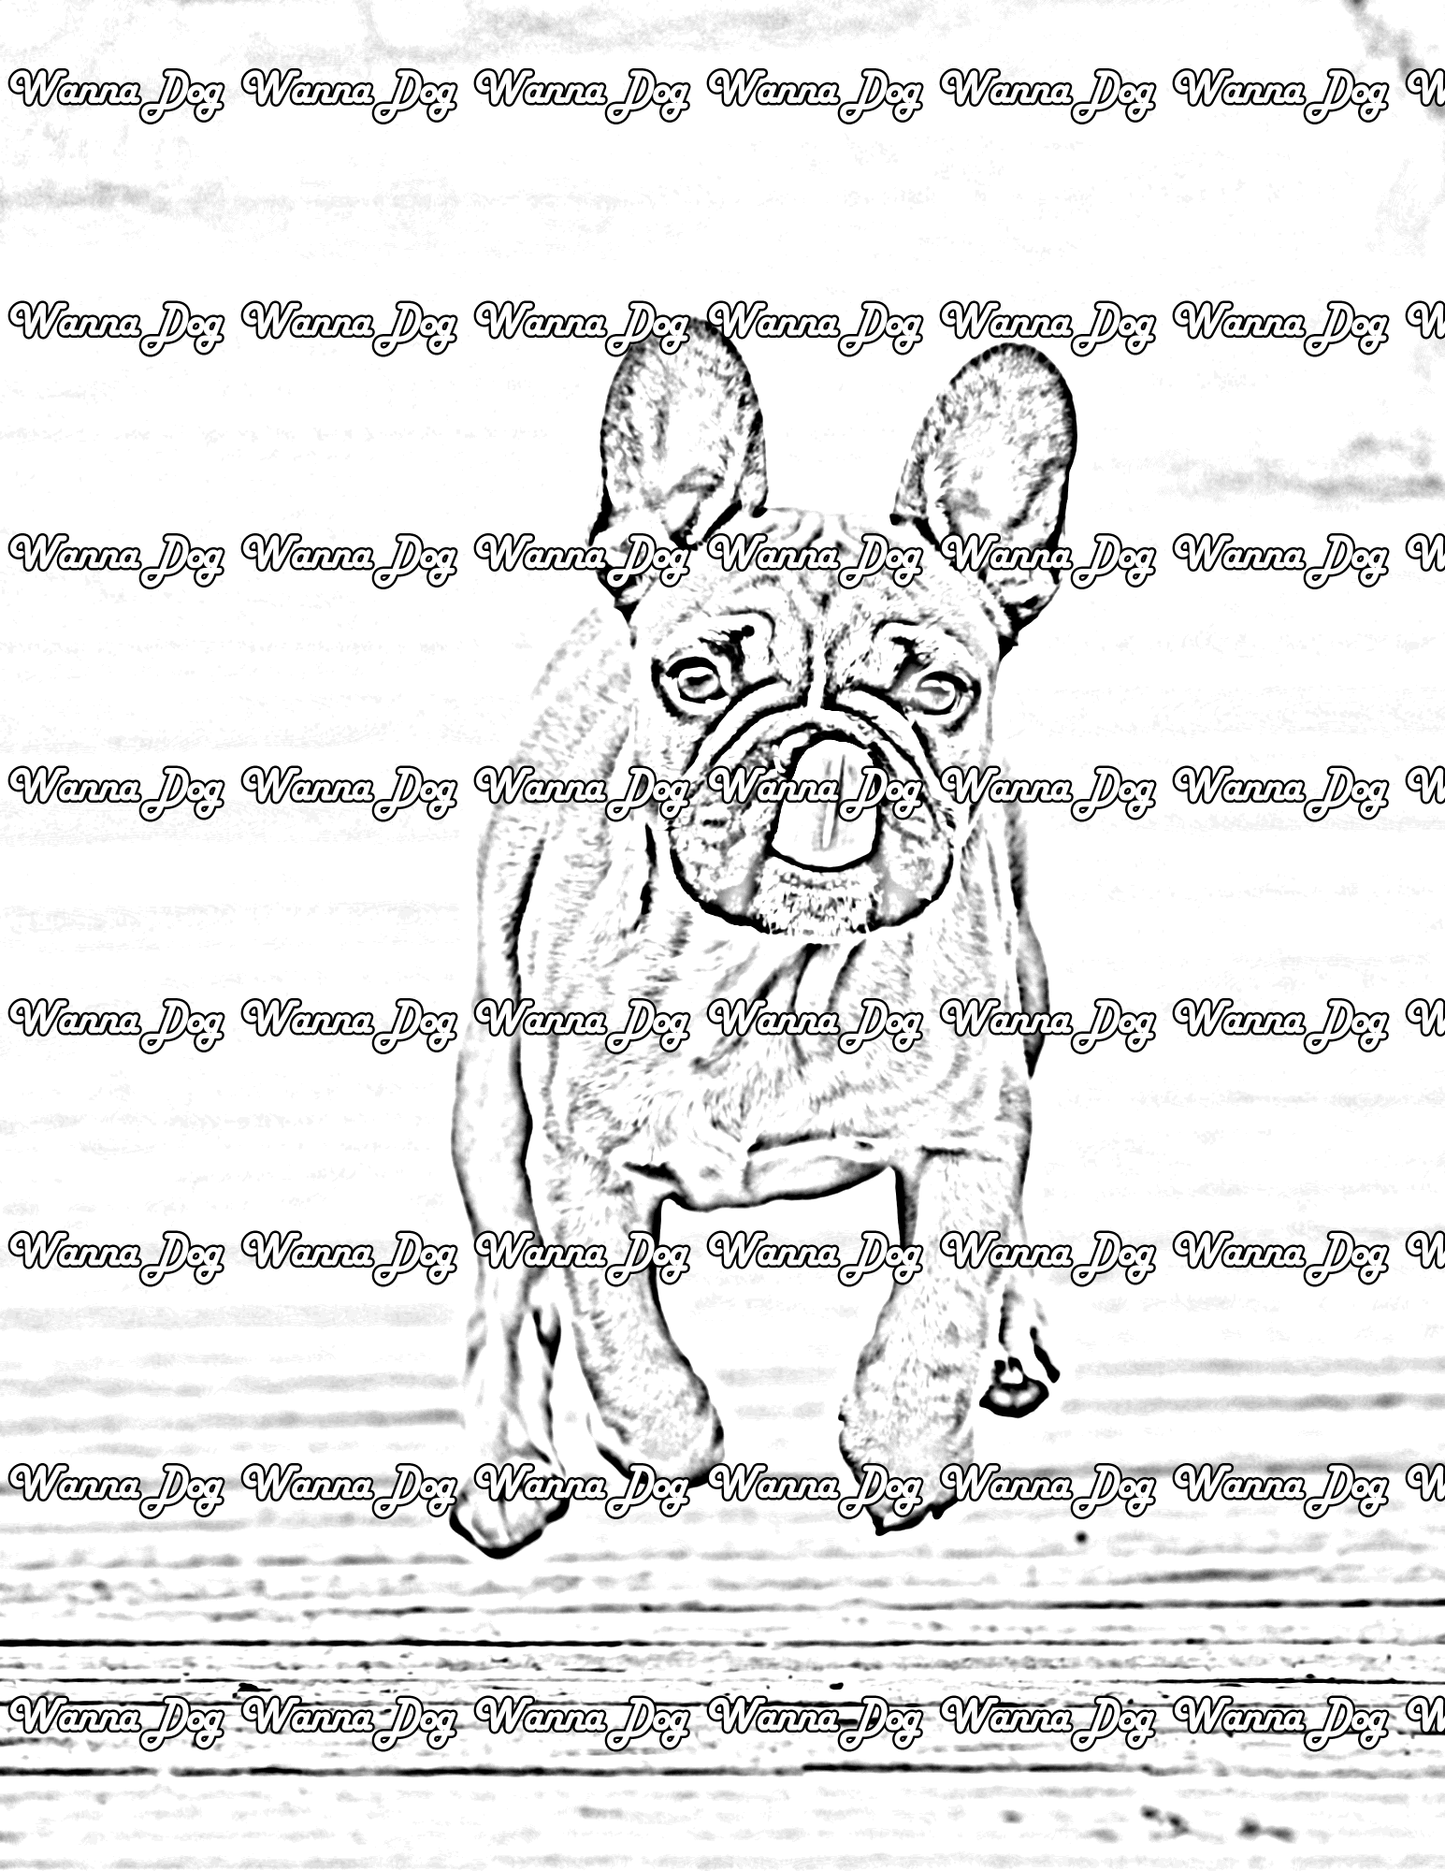 French Bulldog Puppy Coloring Page of a French Bulldog Puppy running with their tongue out